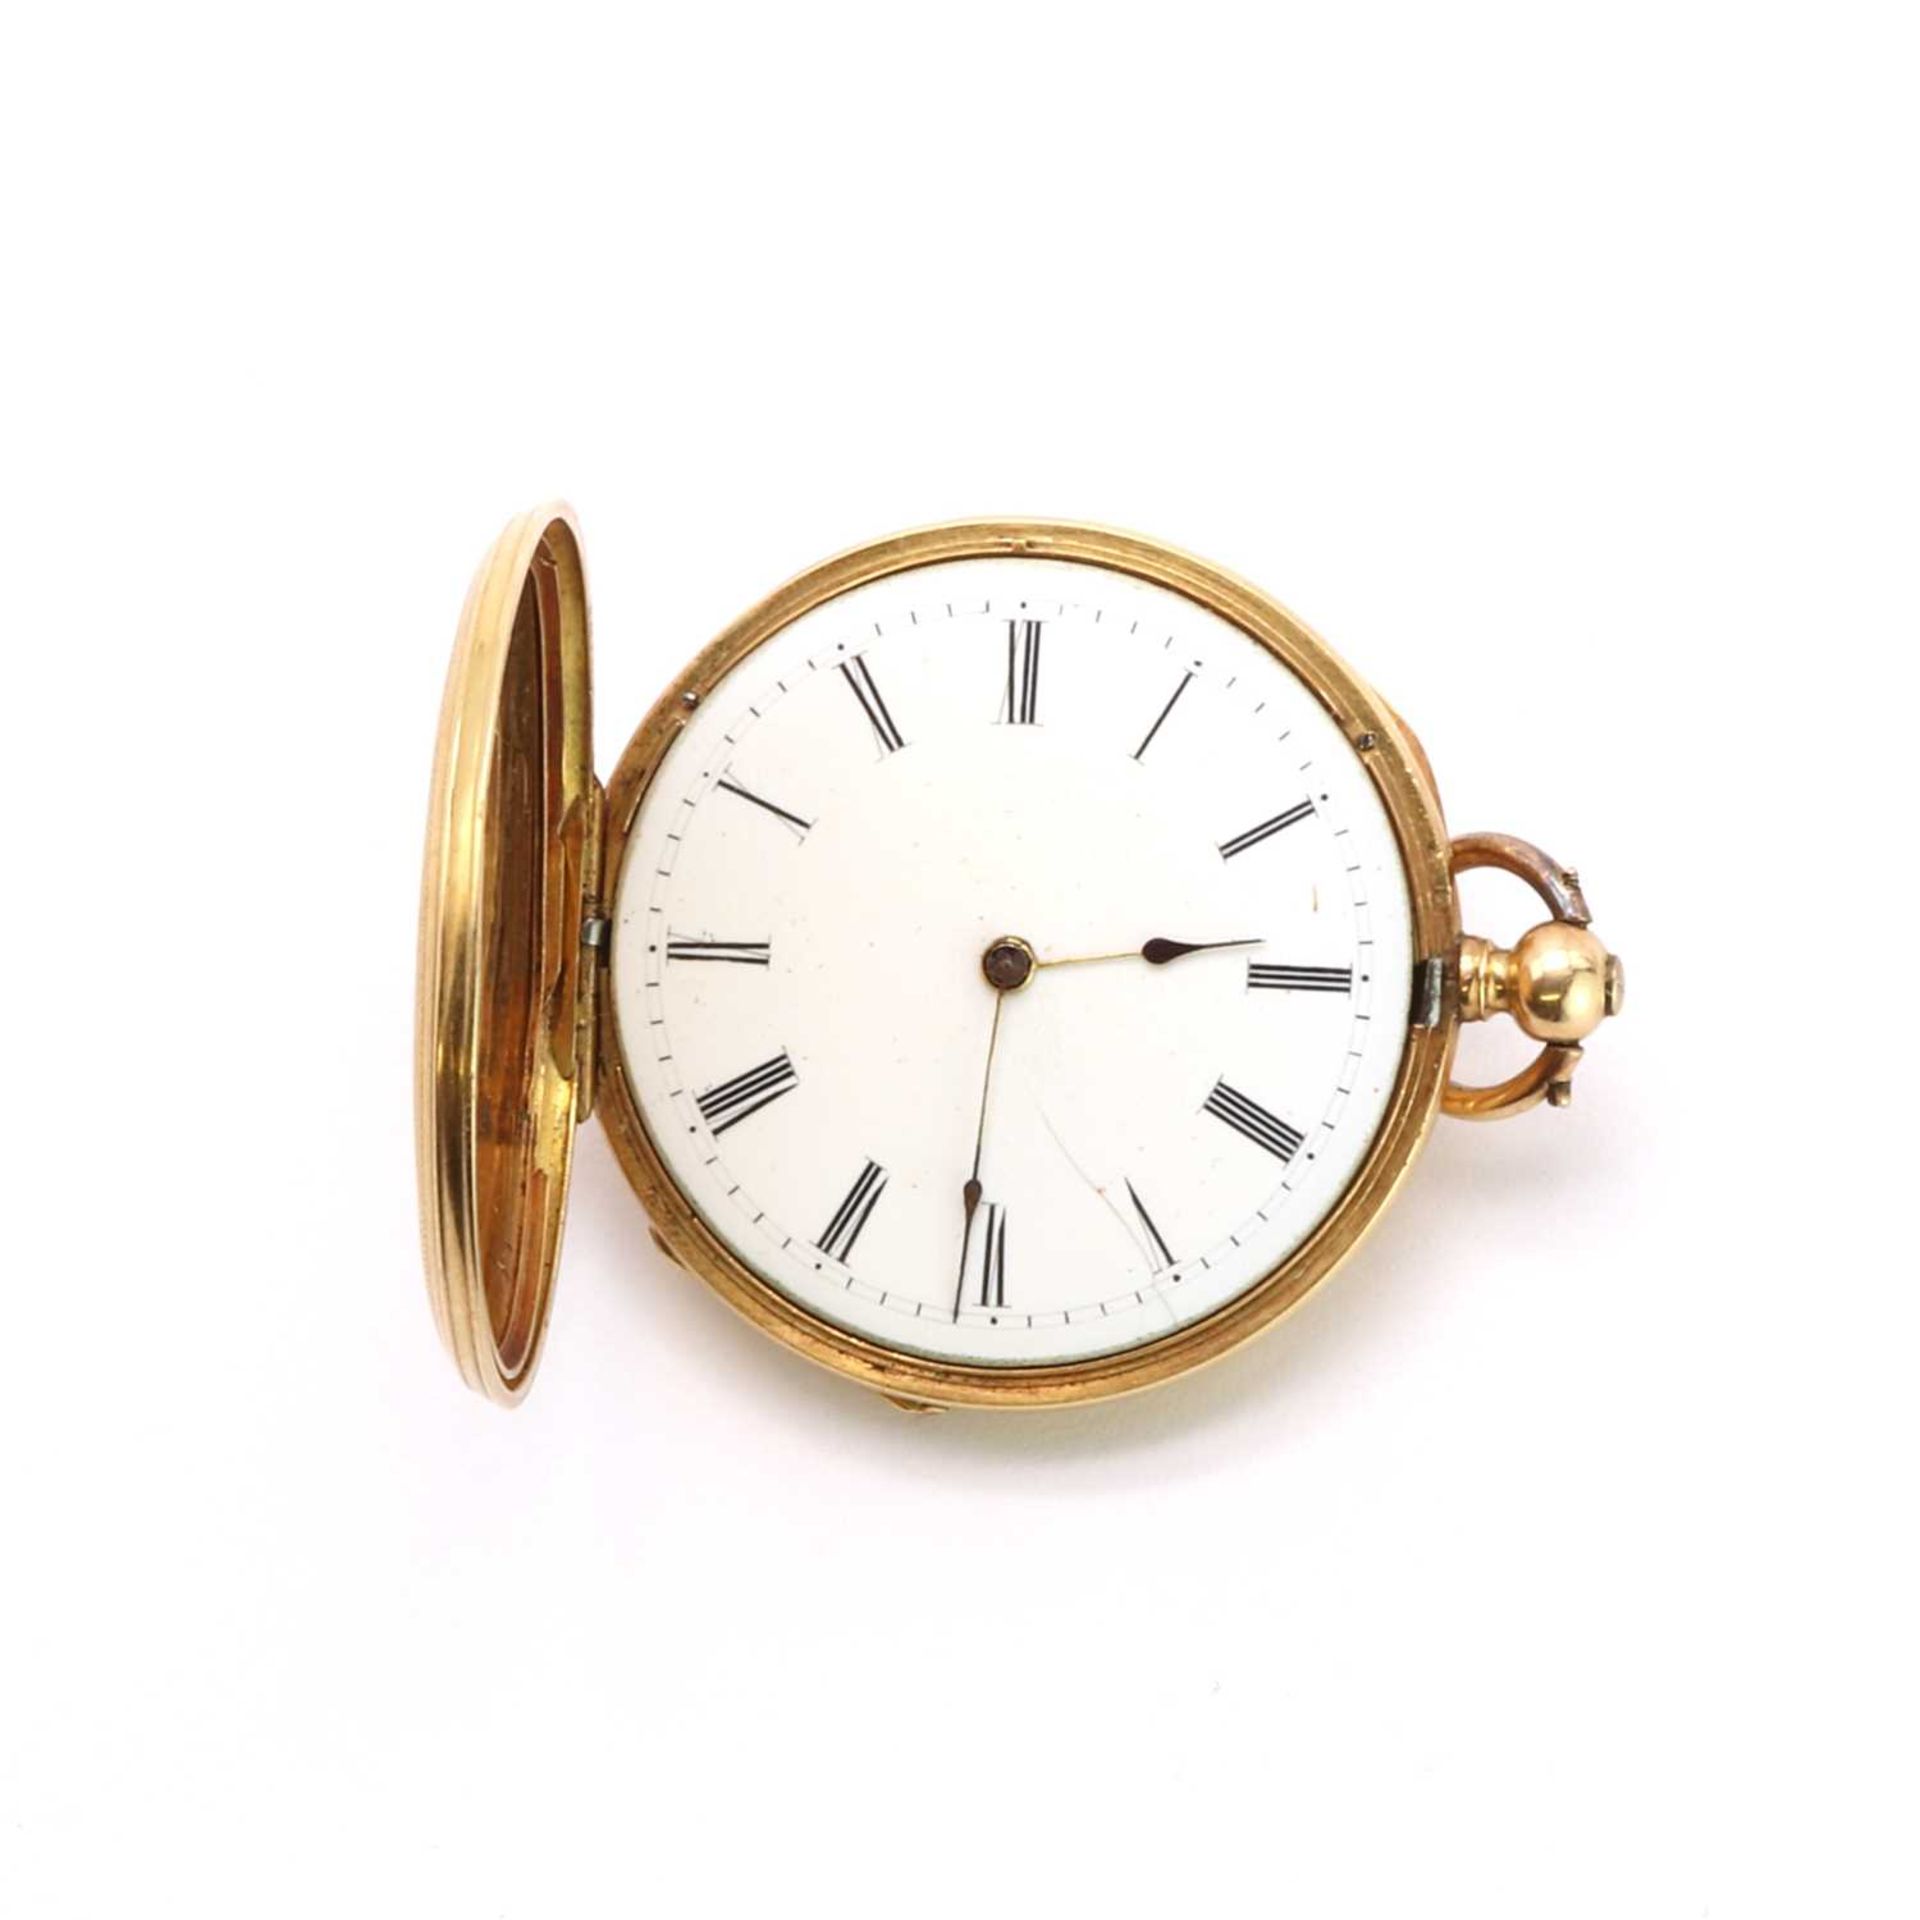 A gold key wind fob watch, - Image 2 of 3